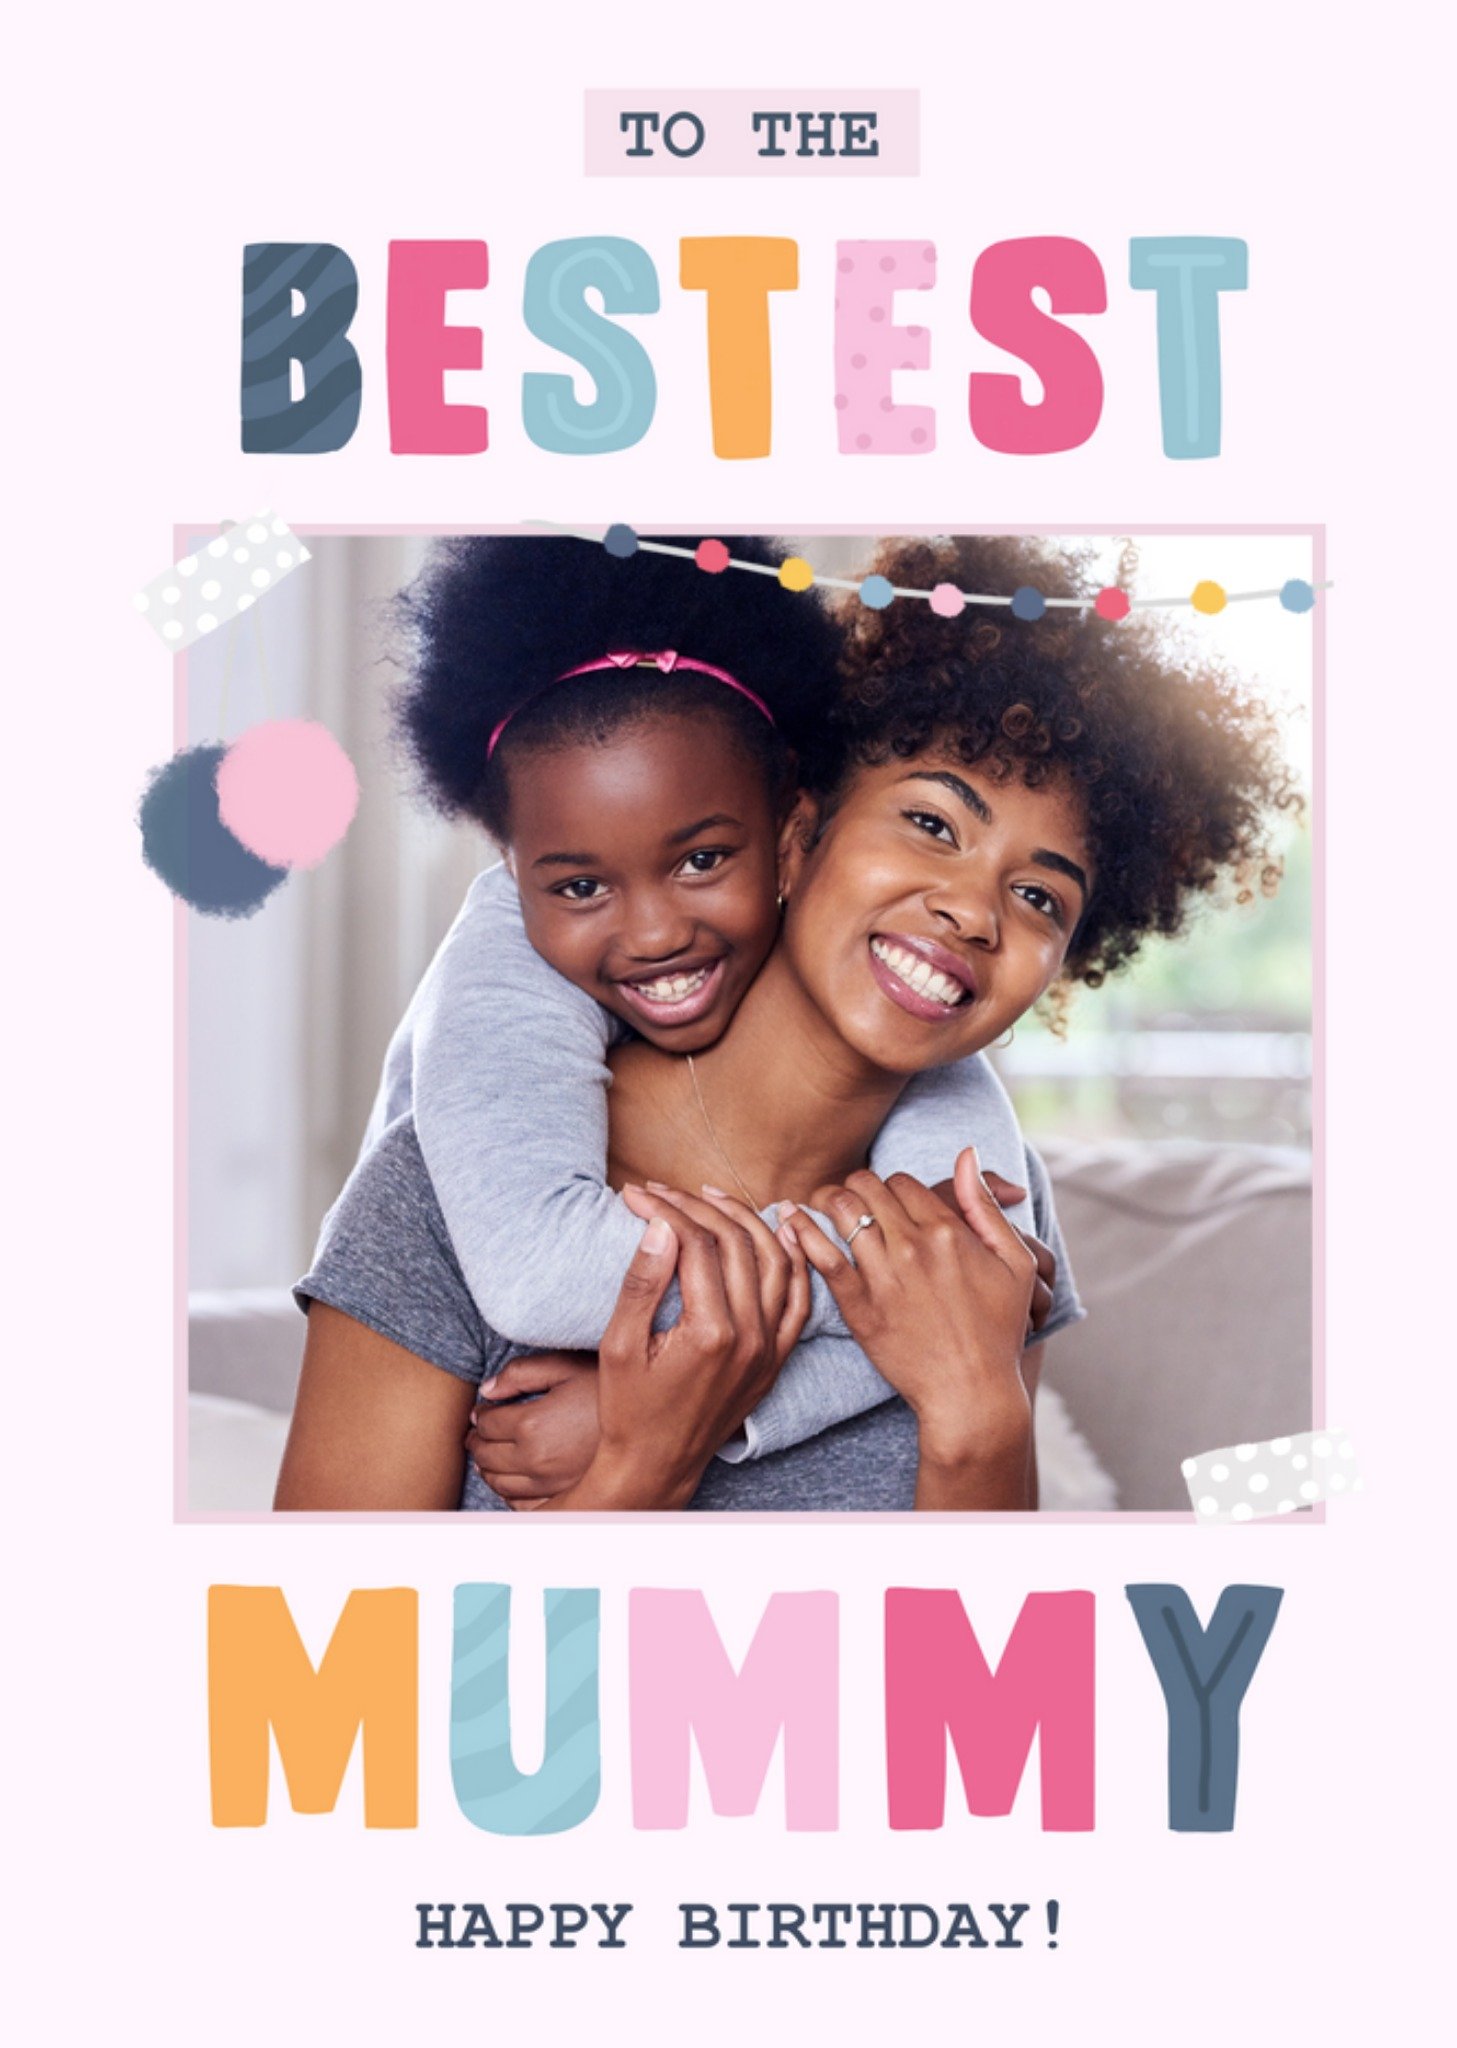 Moonpig Adorable To The Bestest Mummy Hand Drawn Typography Photo Upload Birthday Card, Large